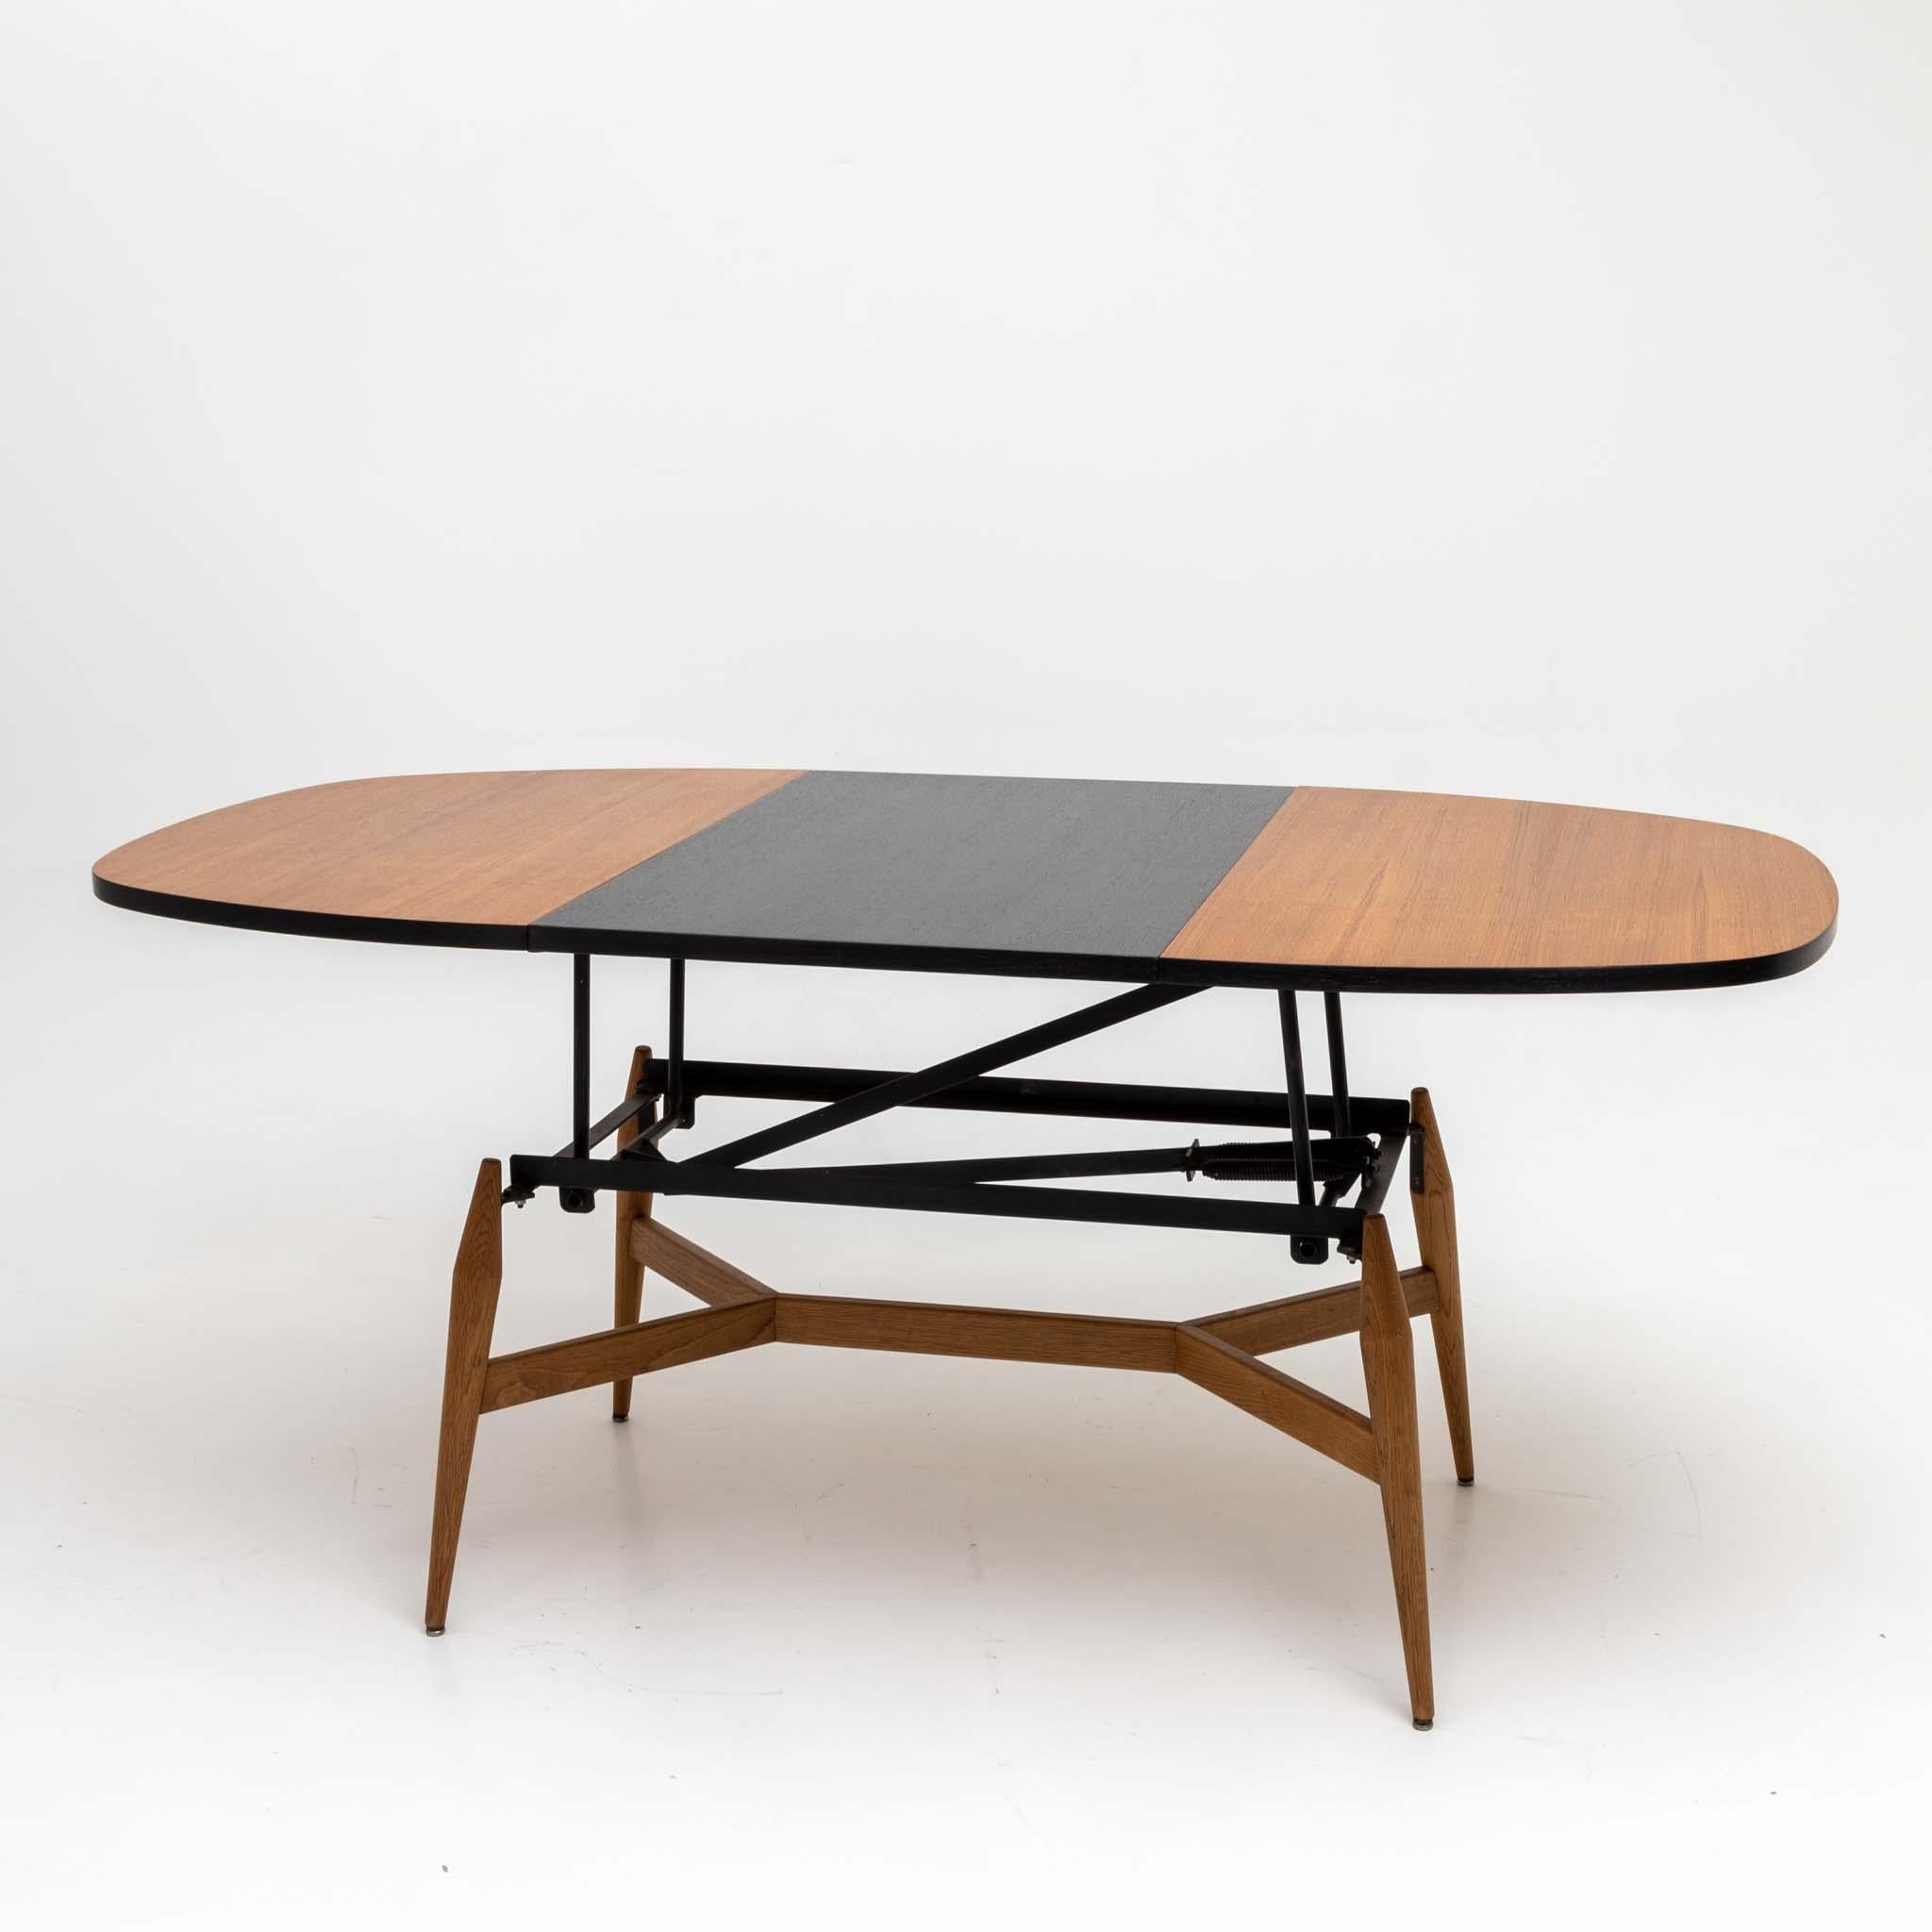 Coffee table with oval table top and conical legs and x-shaped brace. By extending the table top and inserting a center piece (black), it can be converted into a dining table. Dimensions when extended (HxWxD): 73.5 x 166 x 85 cm.